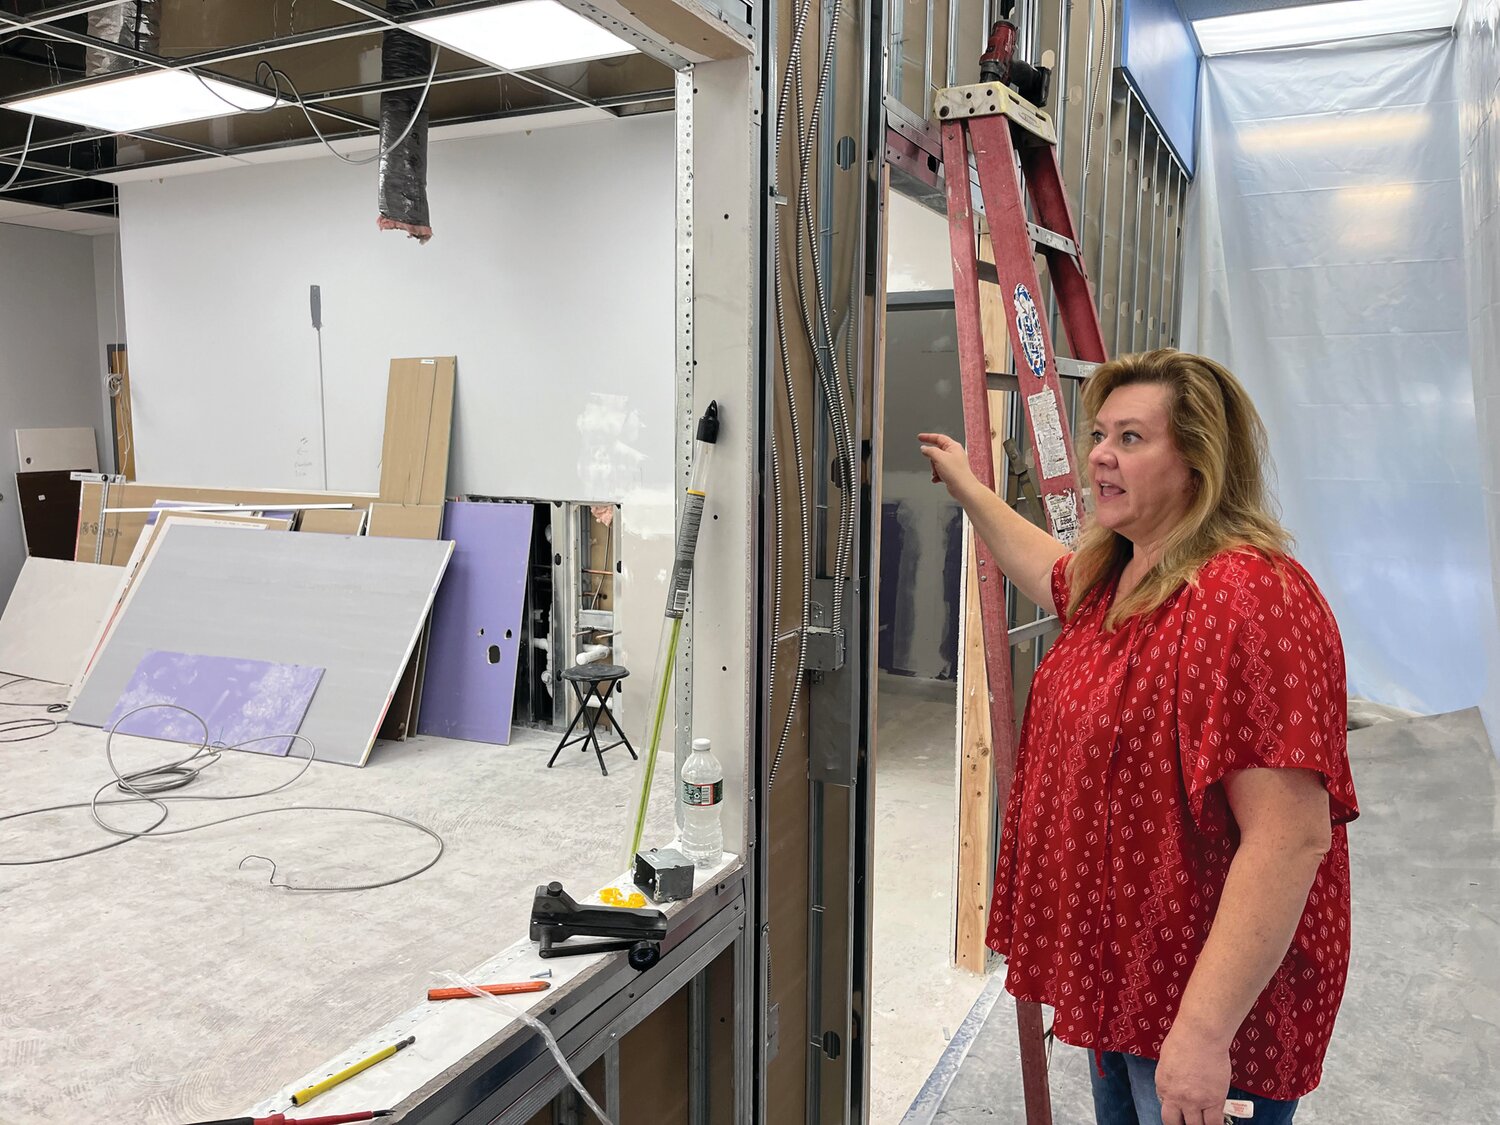 Karin Smith, senior director of Child Care for YMCA of Bucks and Hunterdon Counties, describes the child care renovations being completed at the Round Valley branch in Annandale, N.J.